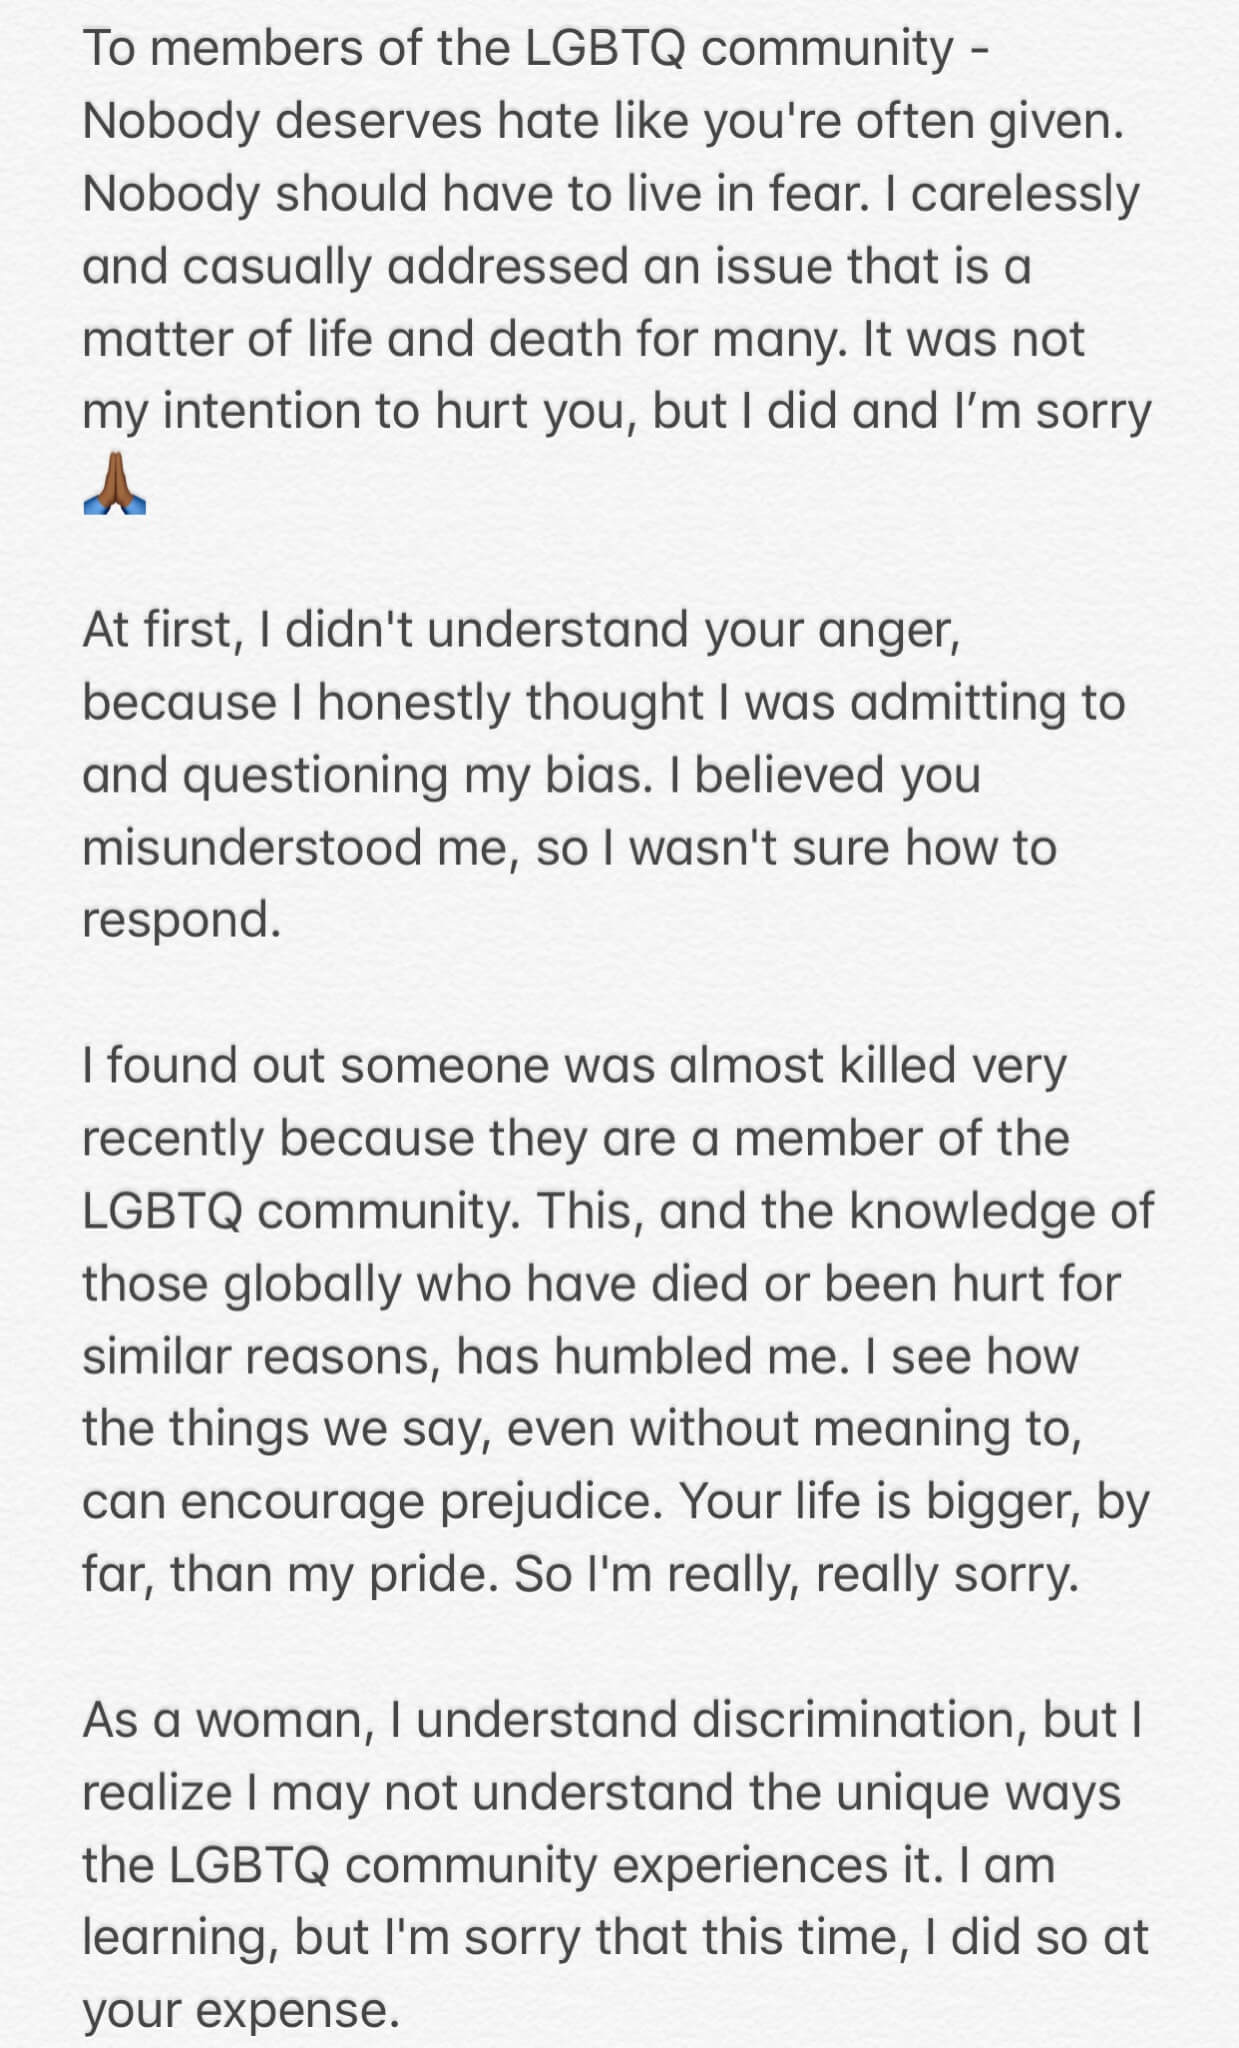 'Nobody deserves hate like you're often given' - Simi apologizes to the LGBTQ community